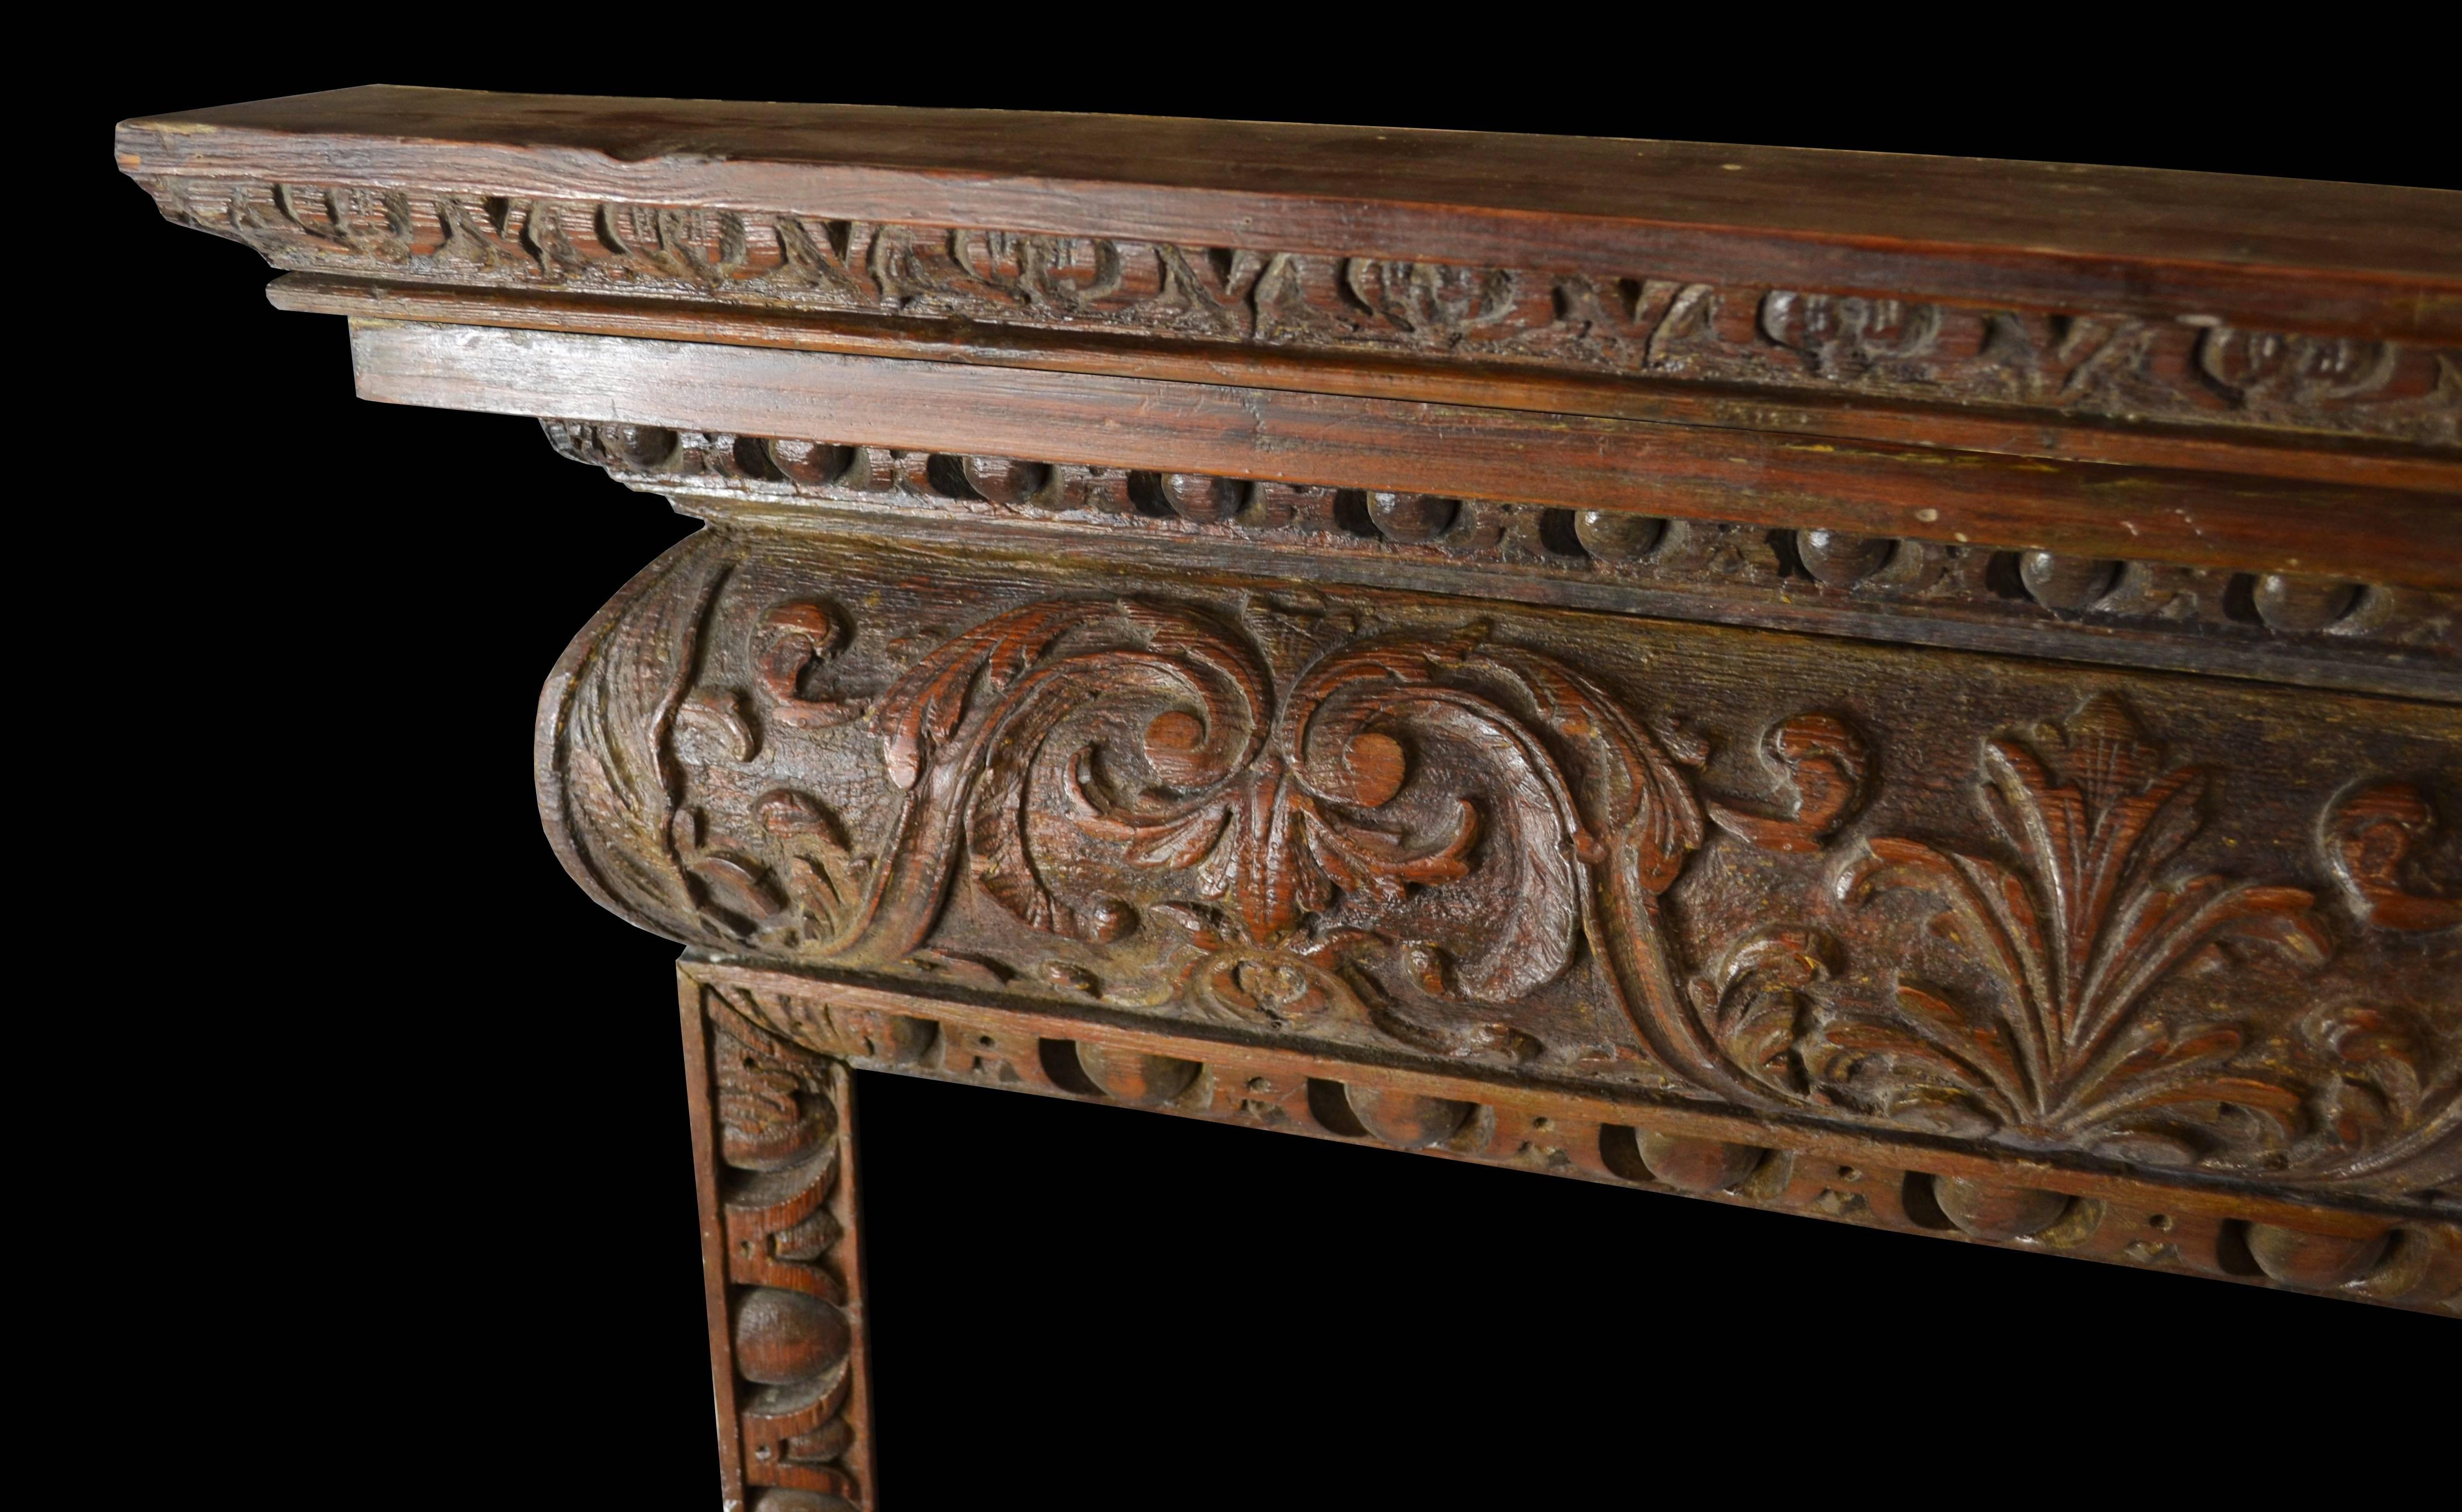 An 18th century carved oak mantel featuring highly detailed egg and dart molding along the frame and under the shelf and a running frieze carved with acanthus. 

Opening dimensions: 41